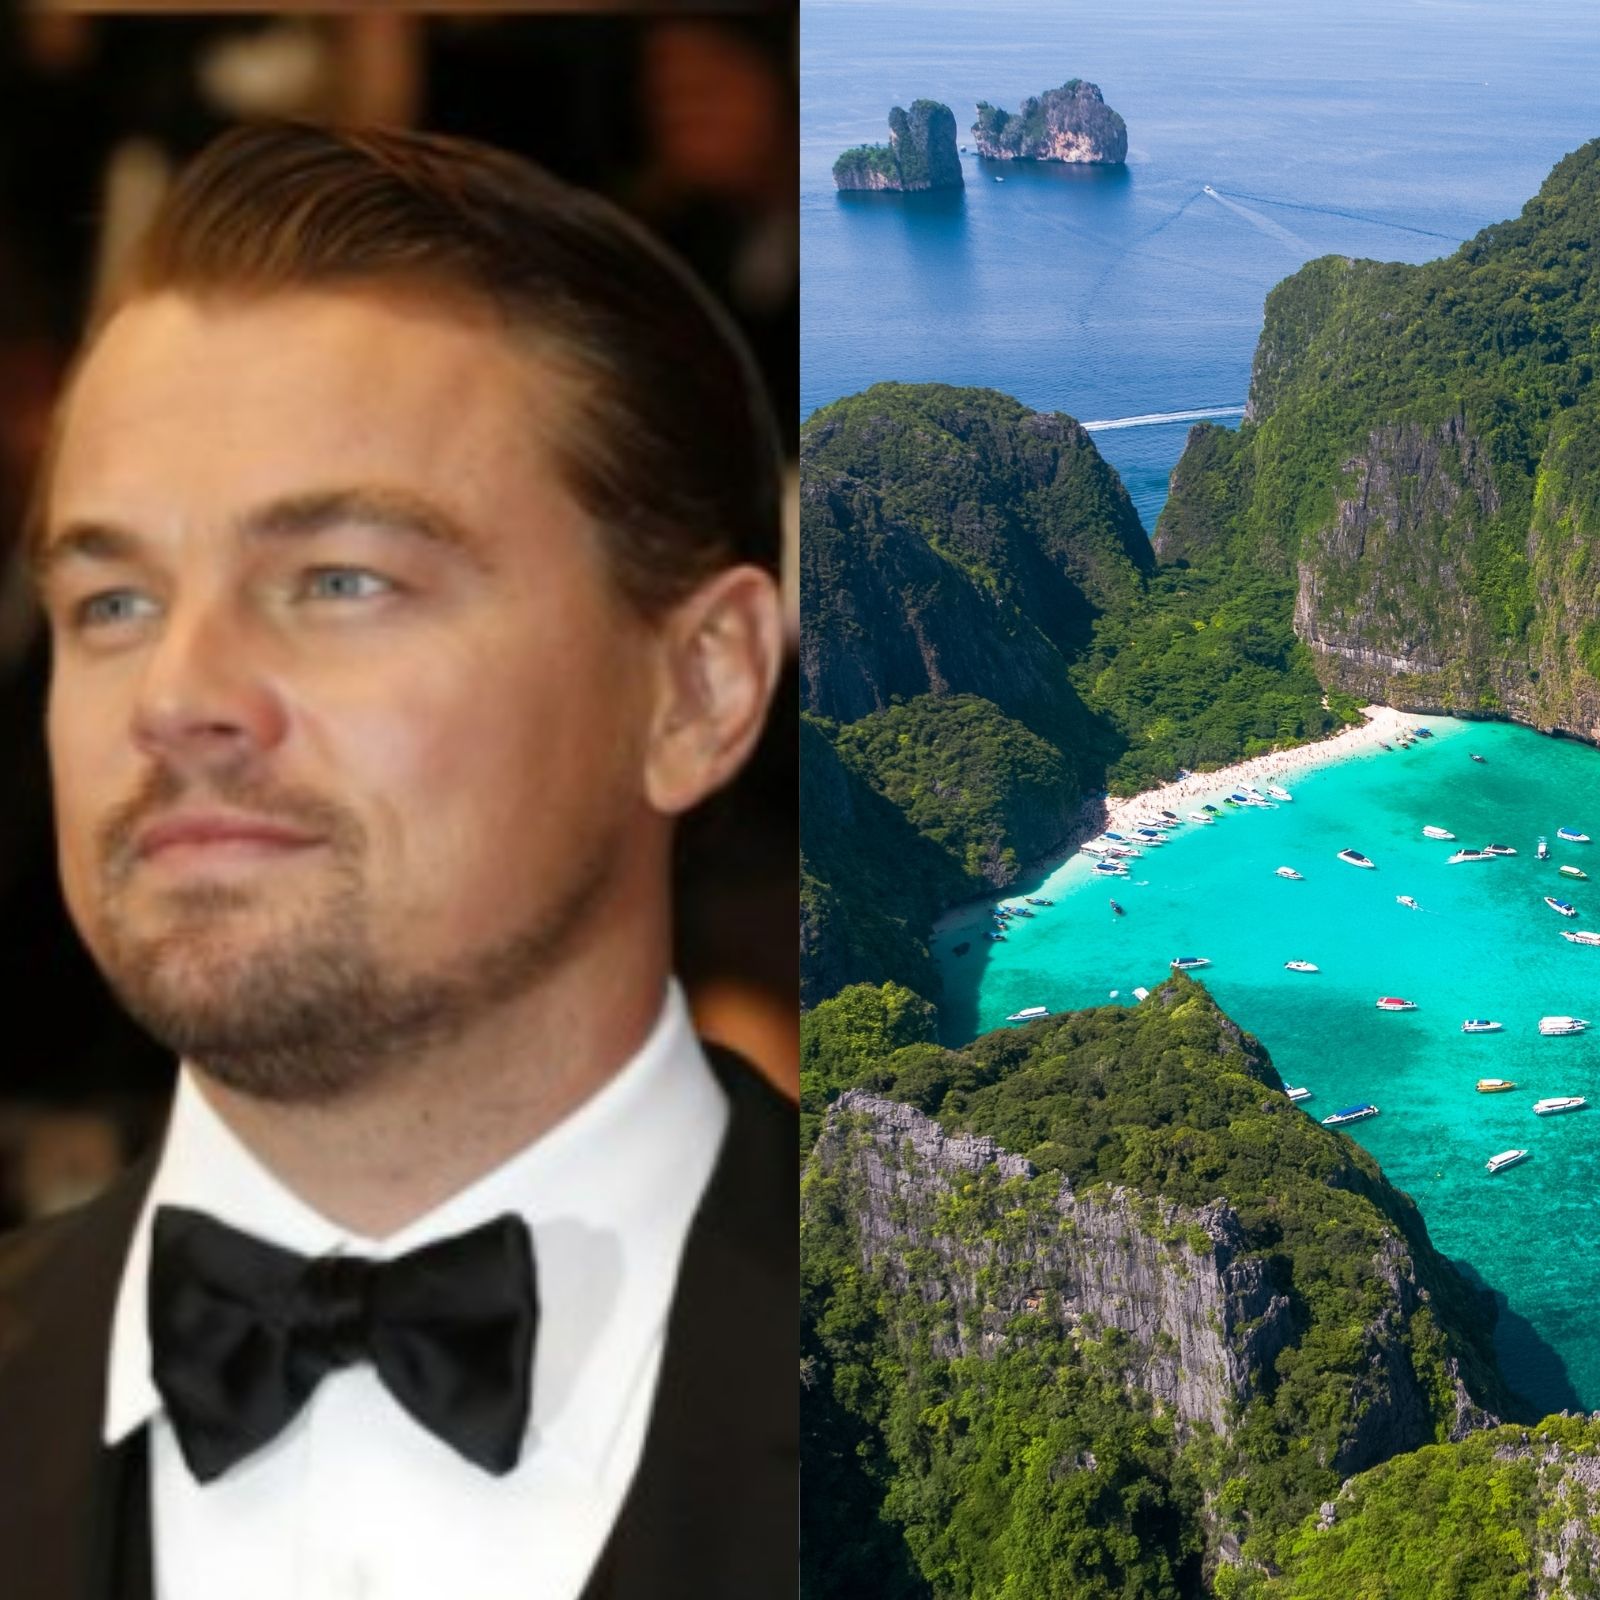 Bay Made Famous by Leonardo DiCaprio's 'The Beach' to Reopen After